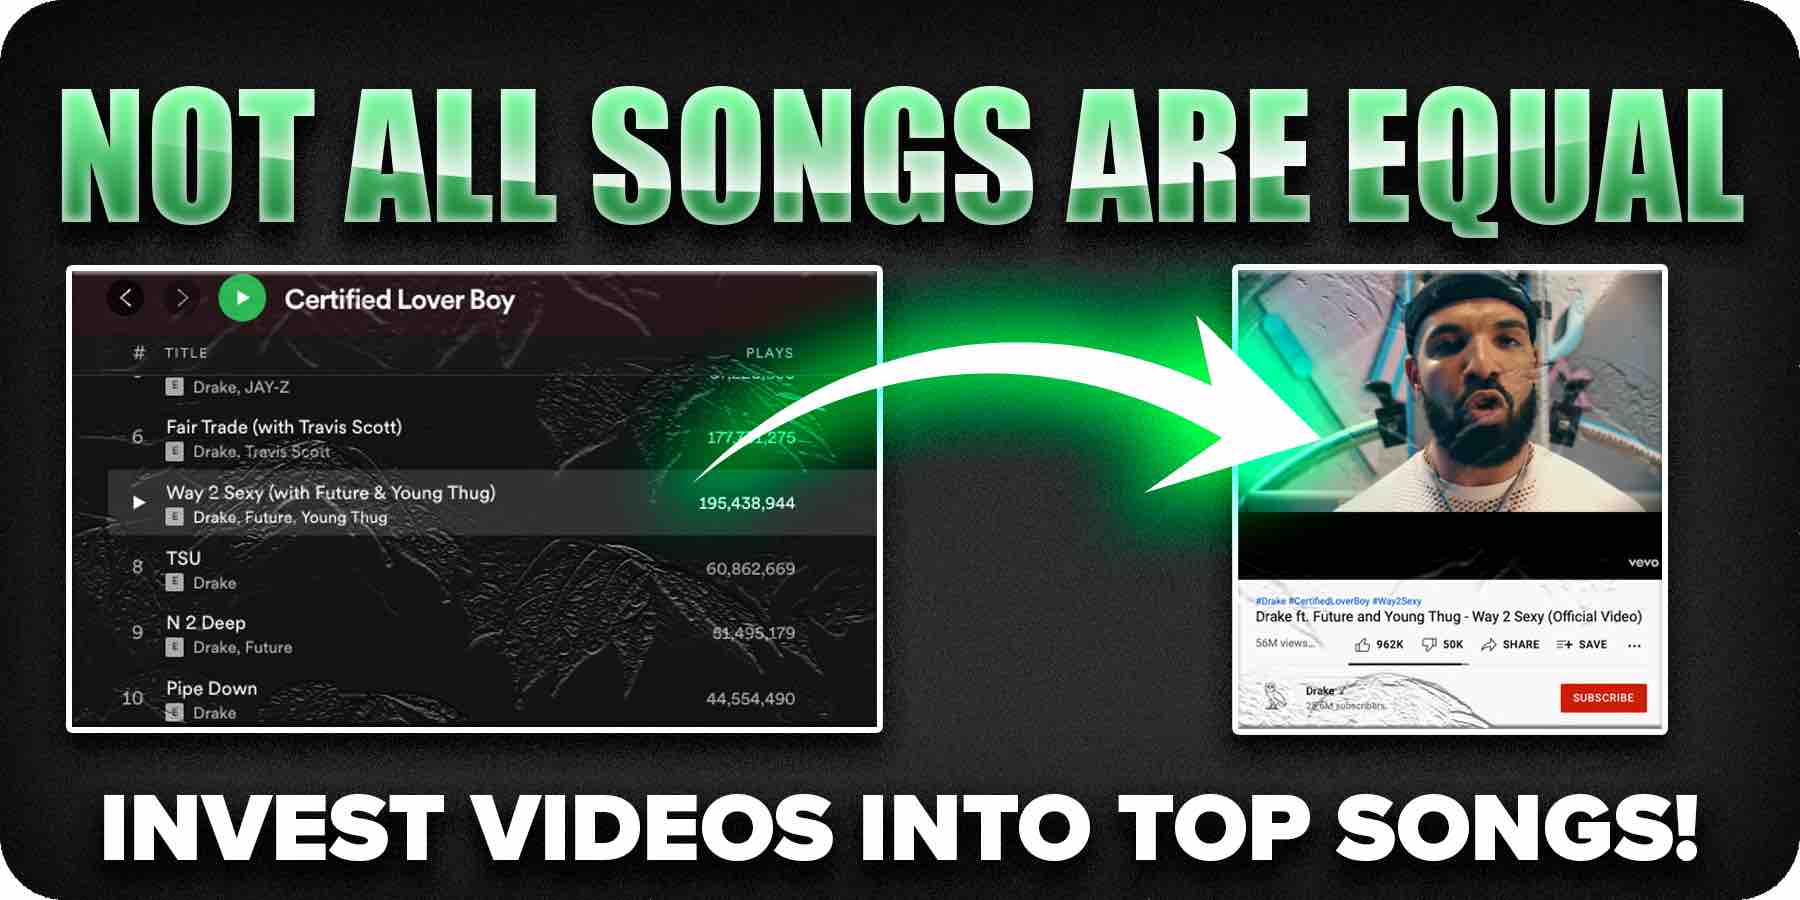 Make Music videos out of top songs